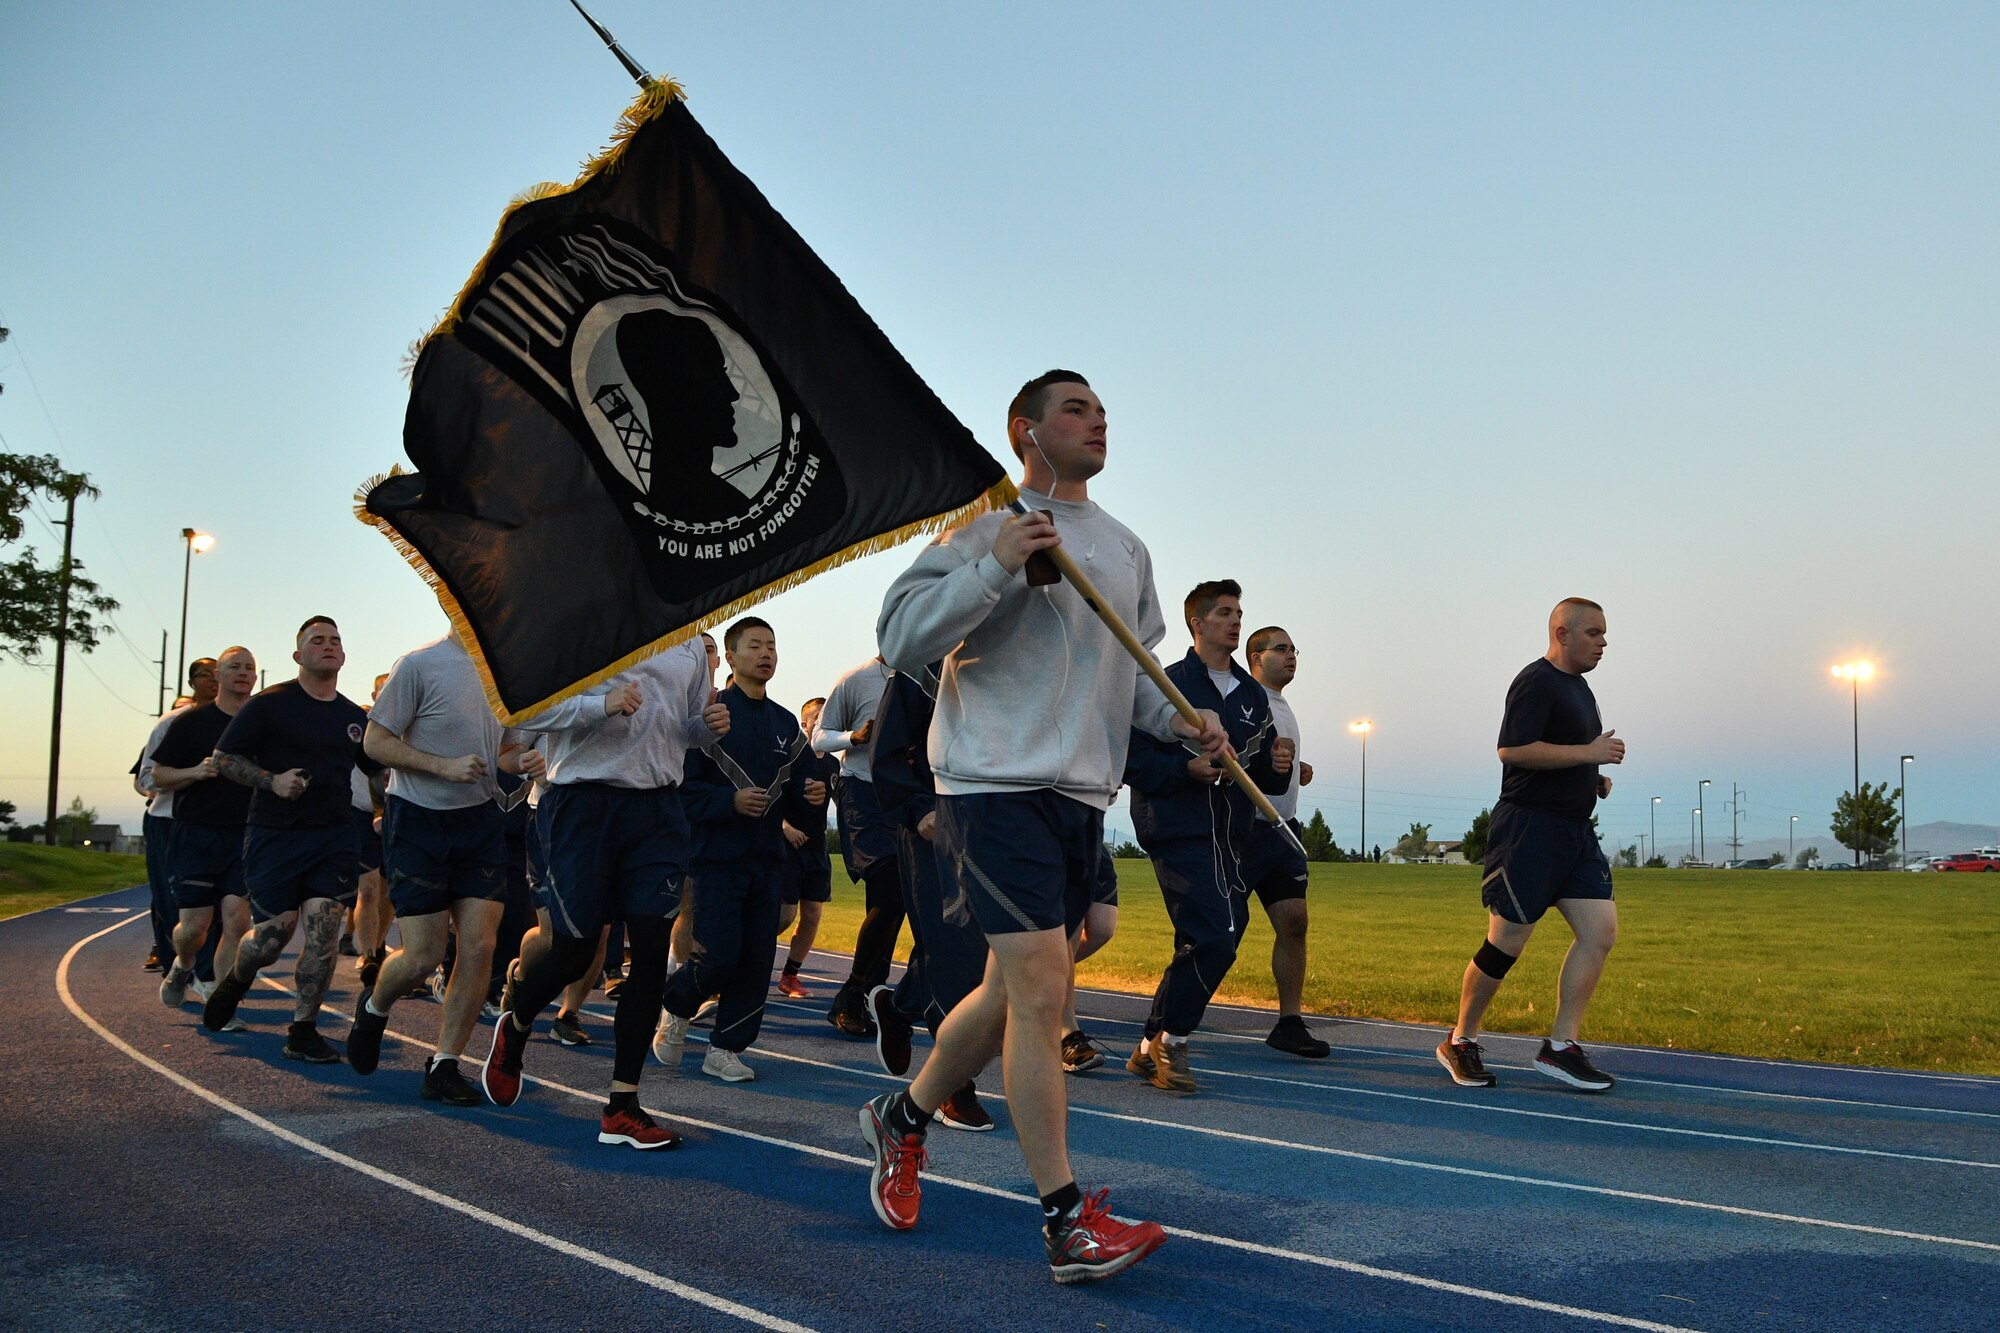 More than 200 Team Hill Airmen kept the POW/MIA flag in motion for 24 hours around the Warrior Fitness Center’s outdoor track to commemorate POW/MIA Recognition Day Sept. 21.